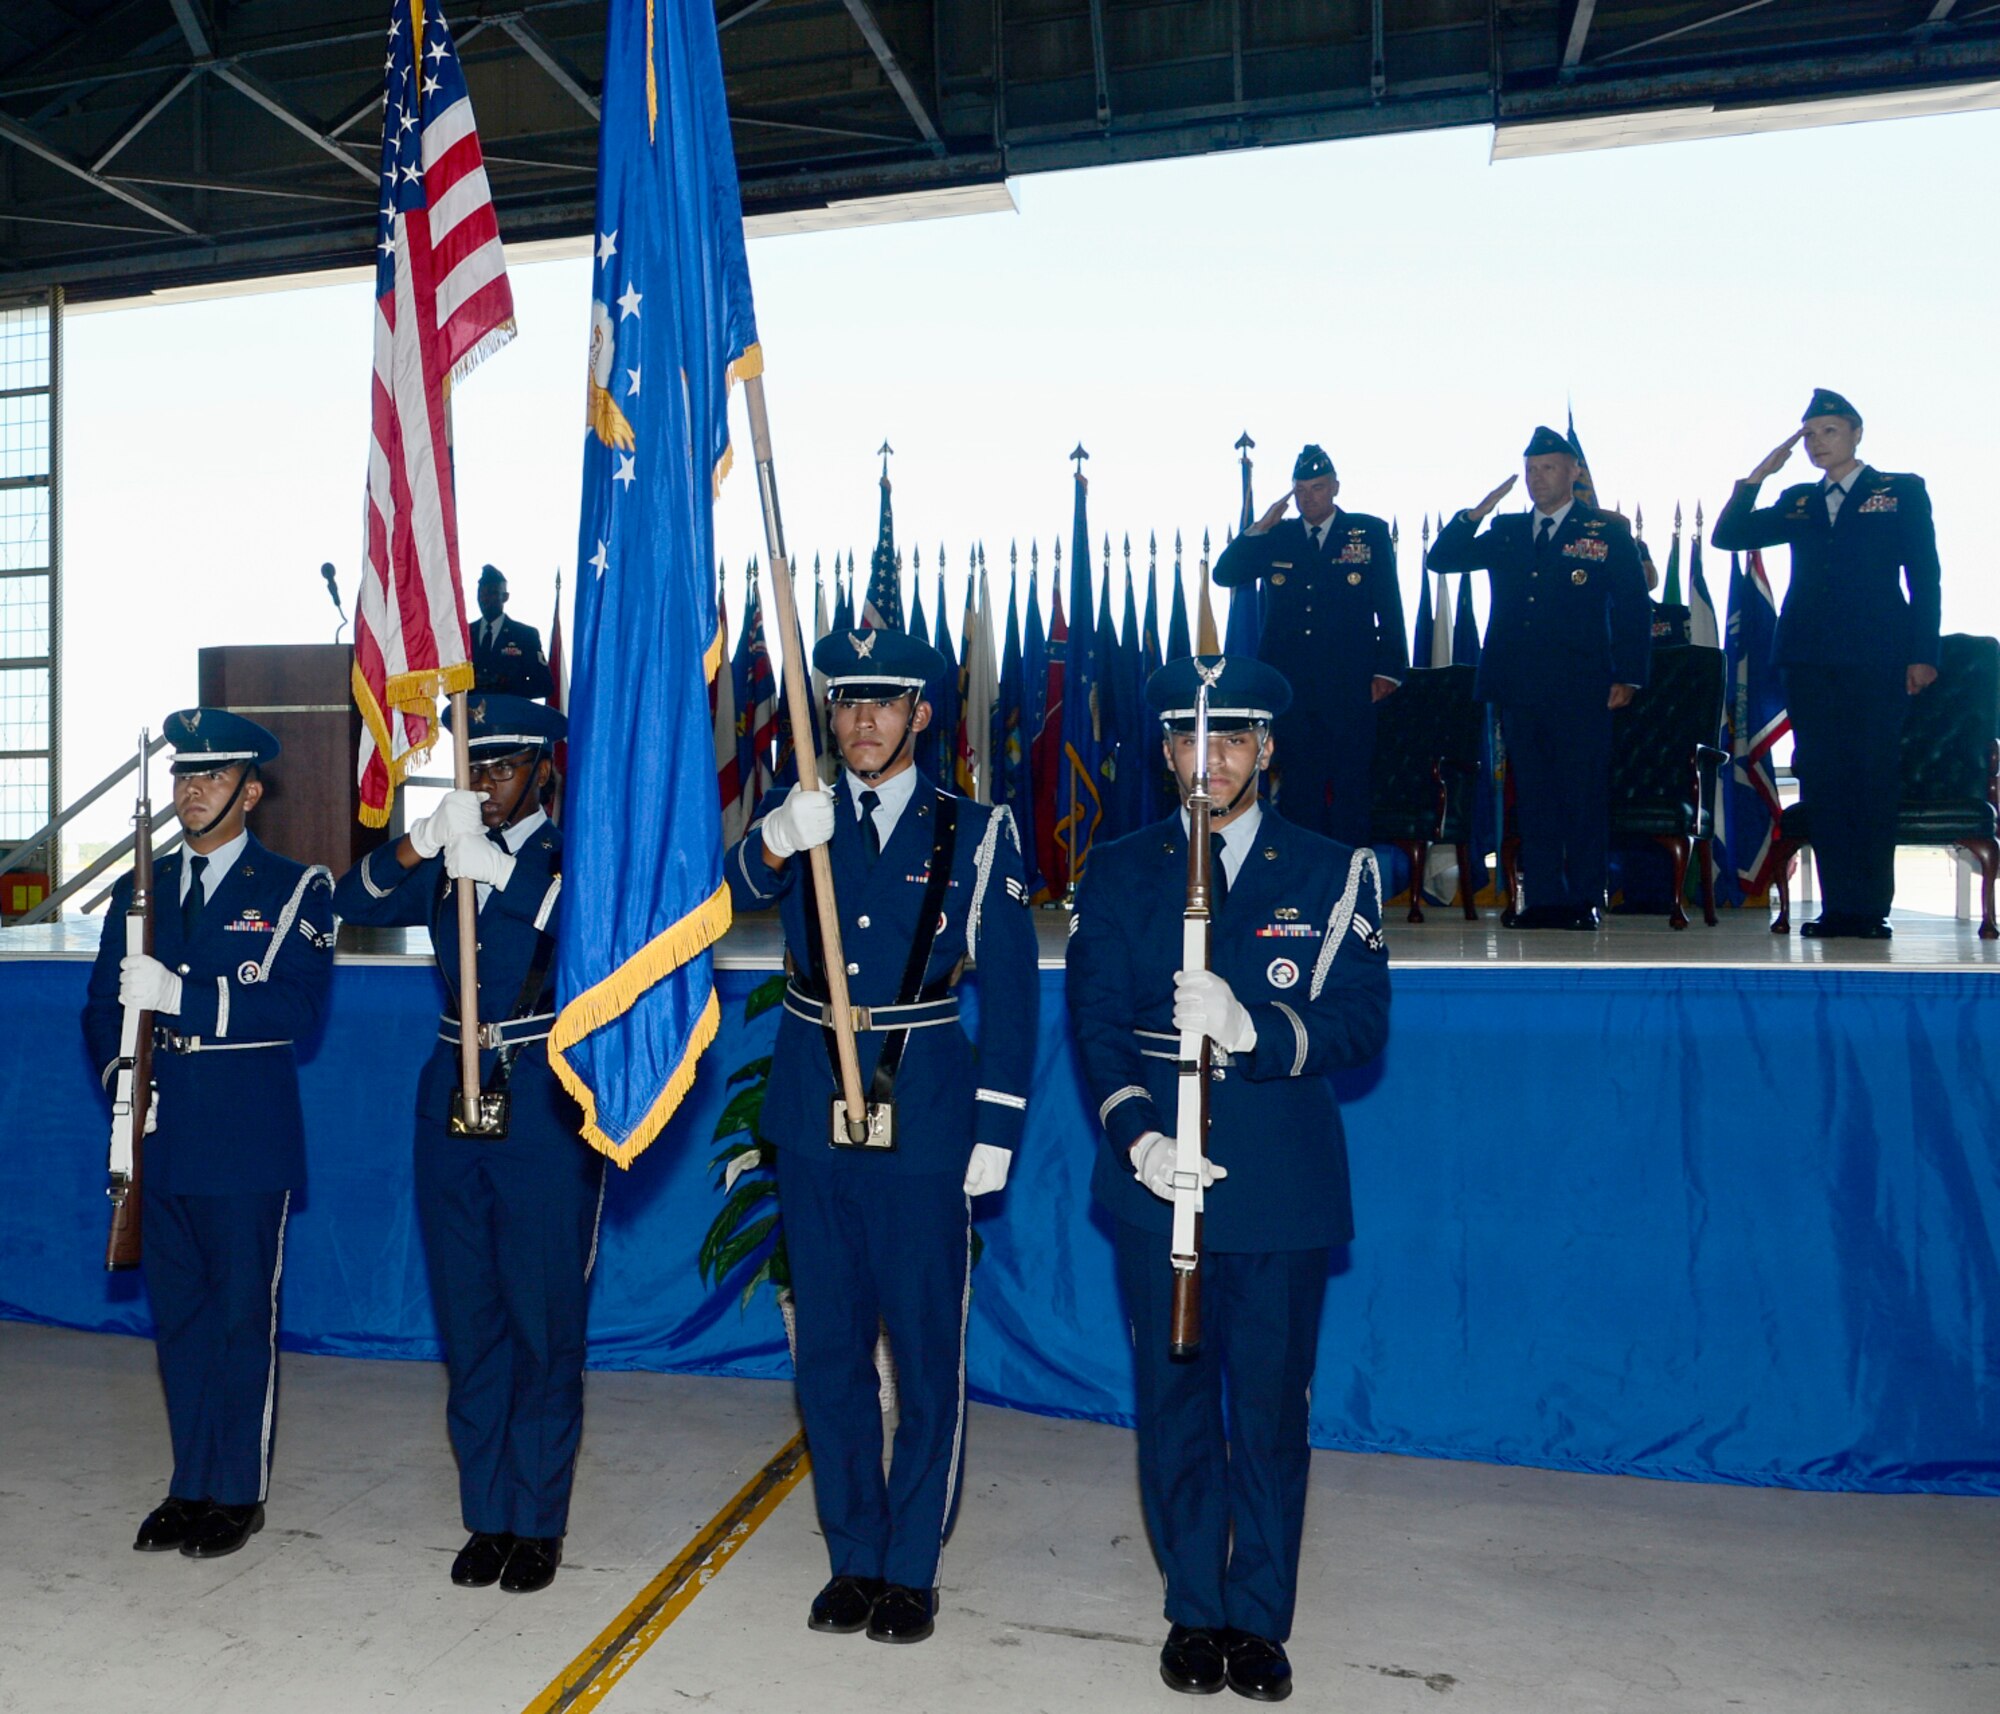 Base Honor Guardsmen from the 6th Force Support Squadron present the colors during the 6th Air Mobility Wing (AMW) change of command ceremony at MacDill Air Force Base, Fla., July 8, 2016. The ceremony marked the beginning of Col. April Vogel’s tenure as commander of the 6th AMW. (U.S. Air Force photo by Tech. Sgt. Krystie Martinez)